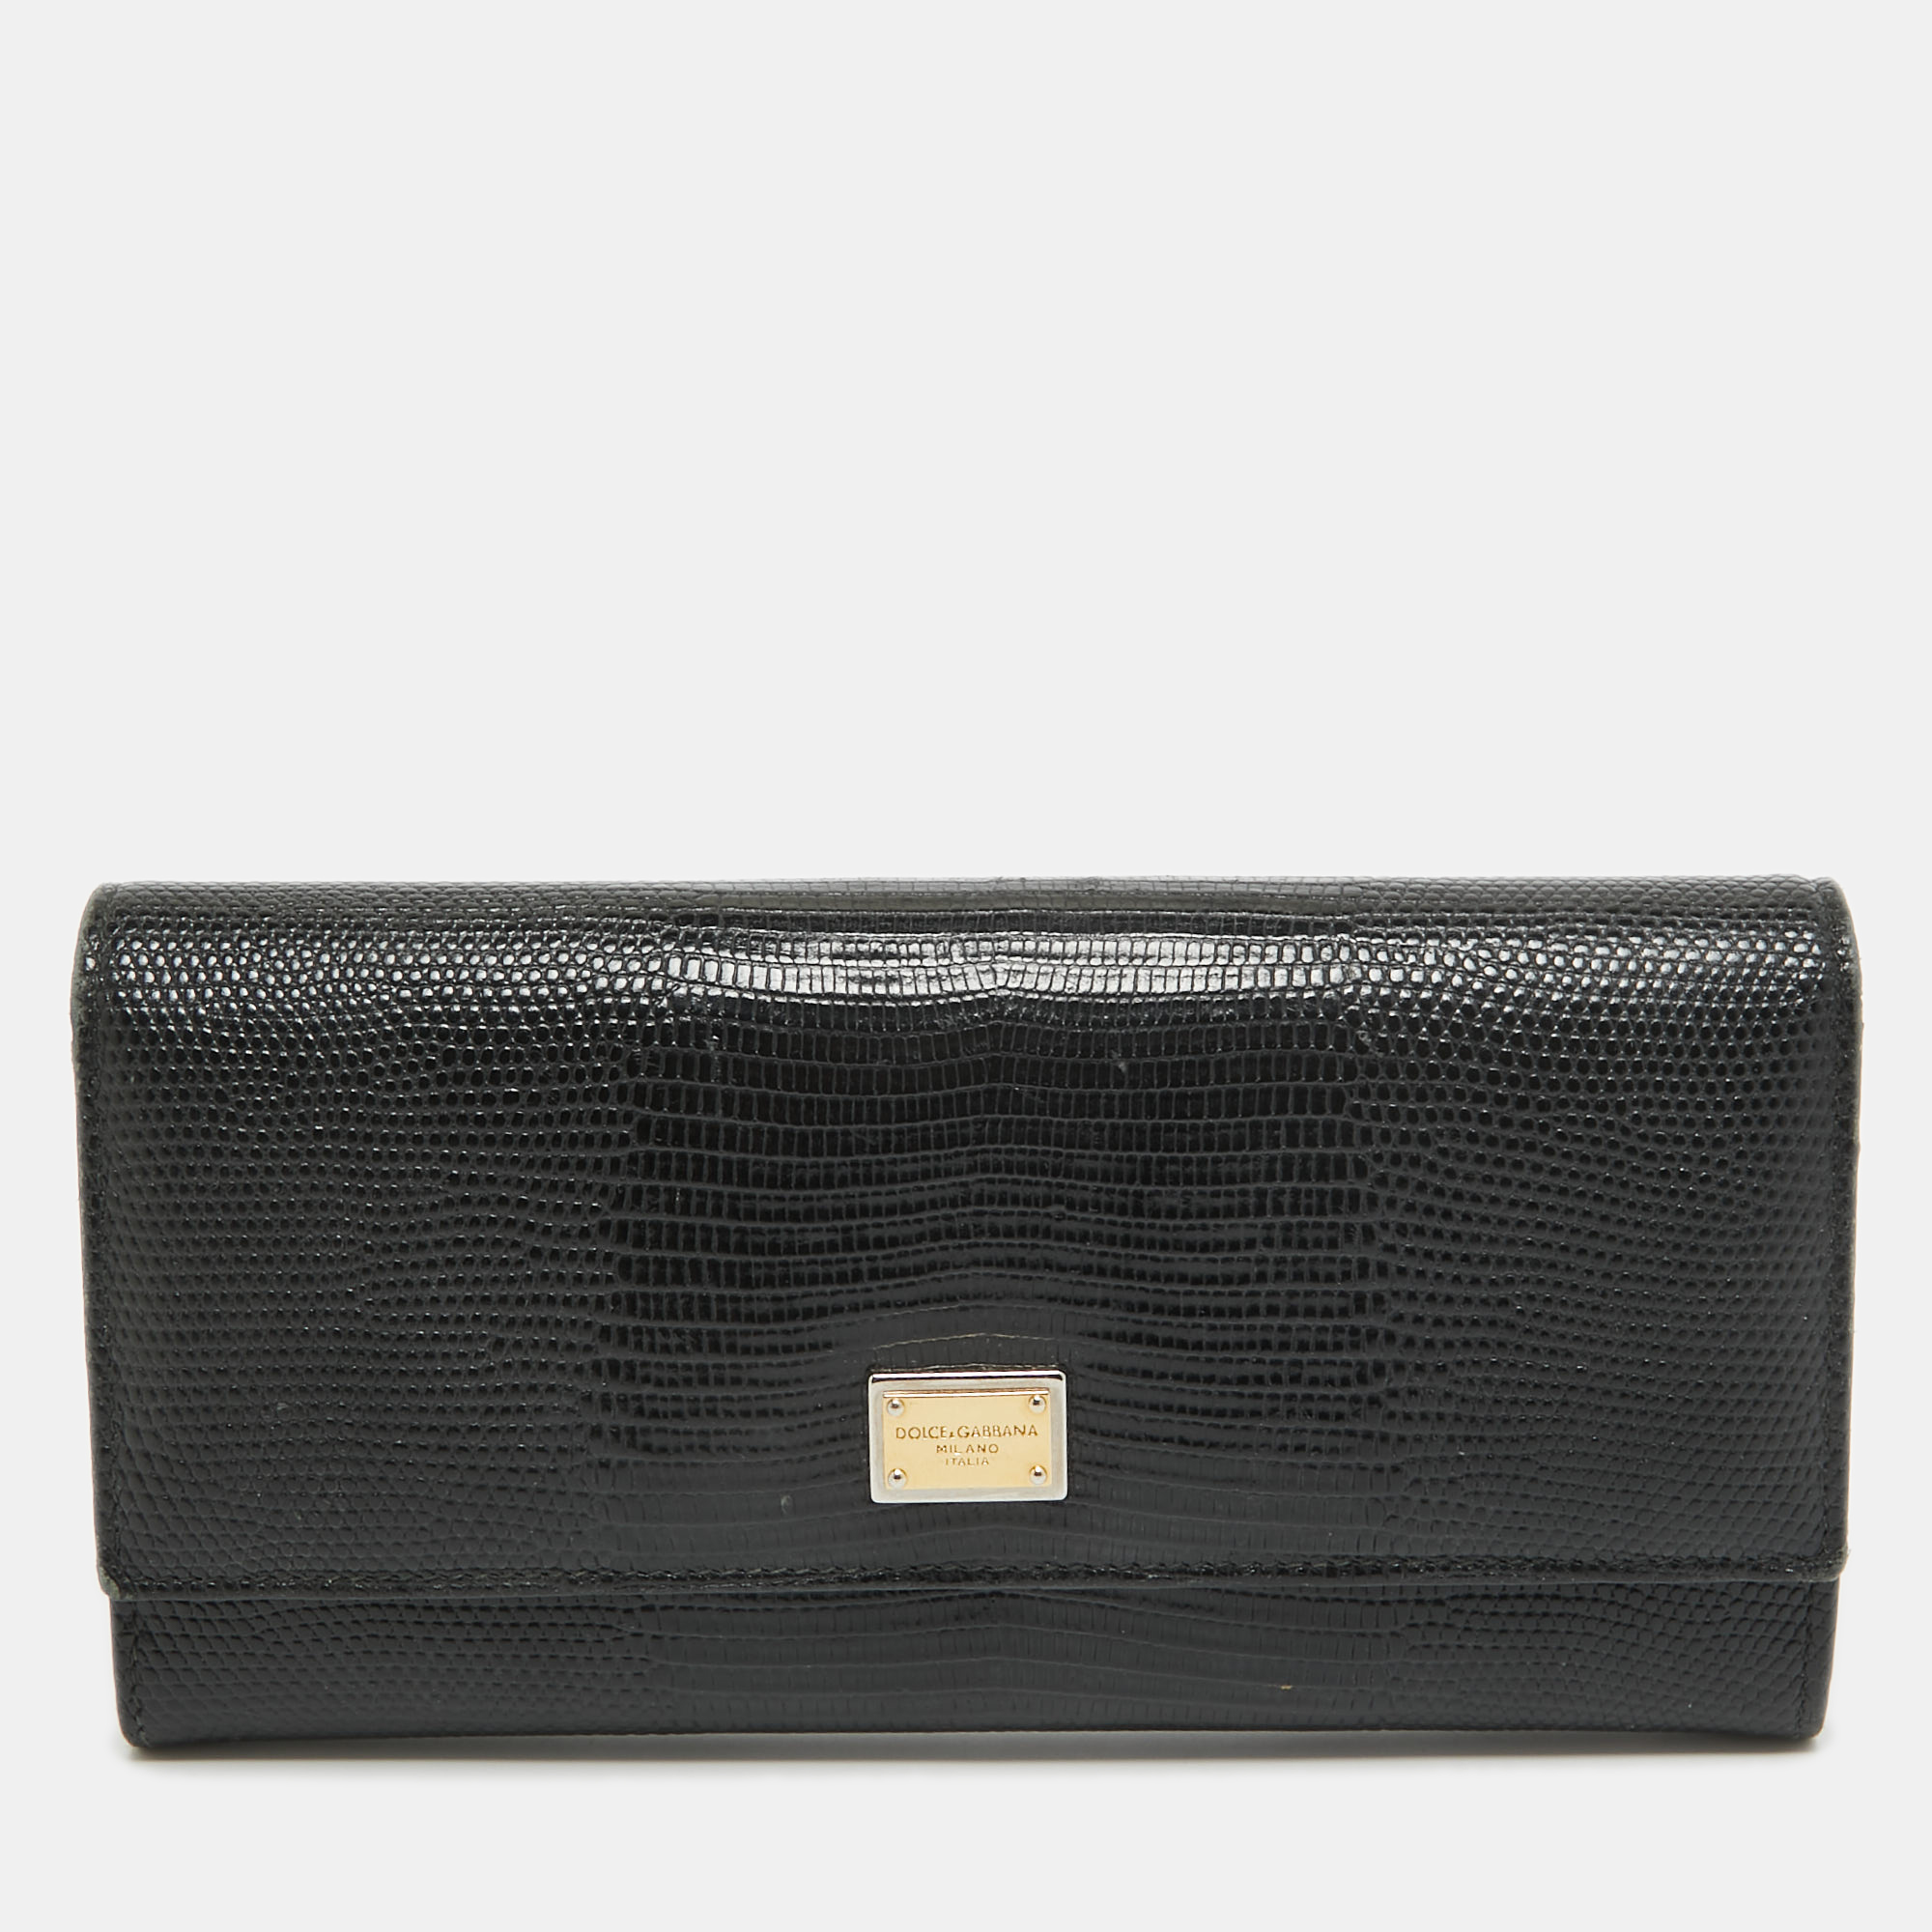 Wallets like this one from Dolce and Gabbana are a necessity since theyre not only functional but also stylish. Crafted from lizard embossed leather this wallet comes with the famous label on the flap which secures multiple slots and compartments to neatly arrange your cards and cash.